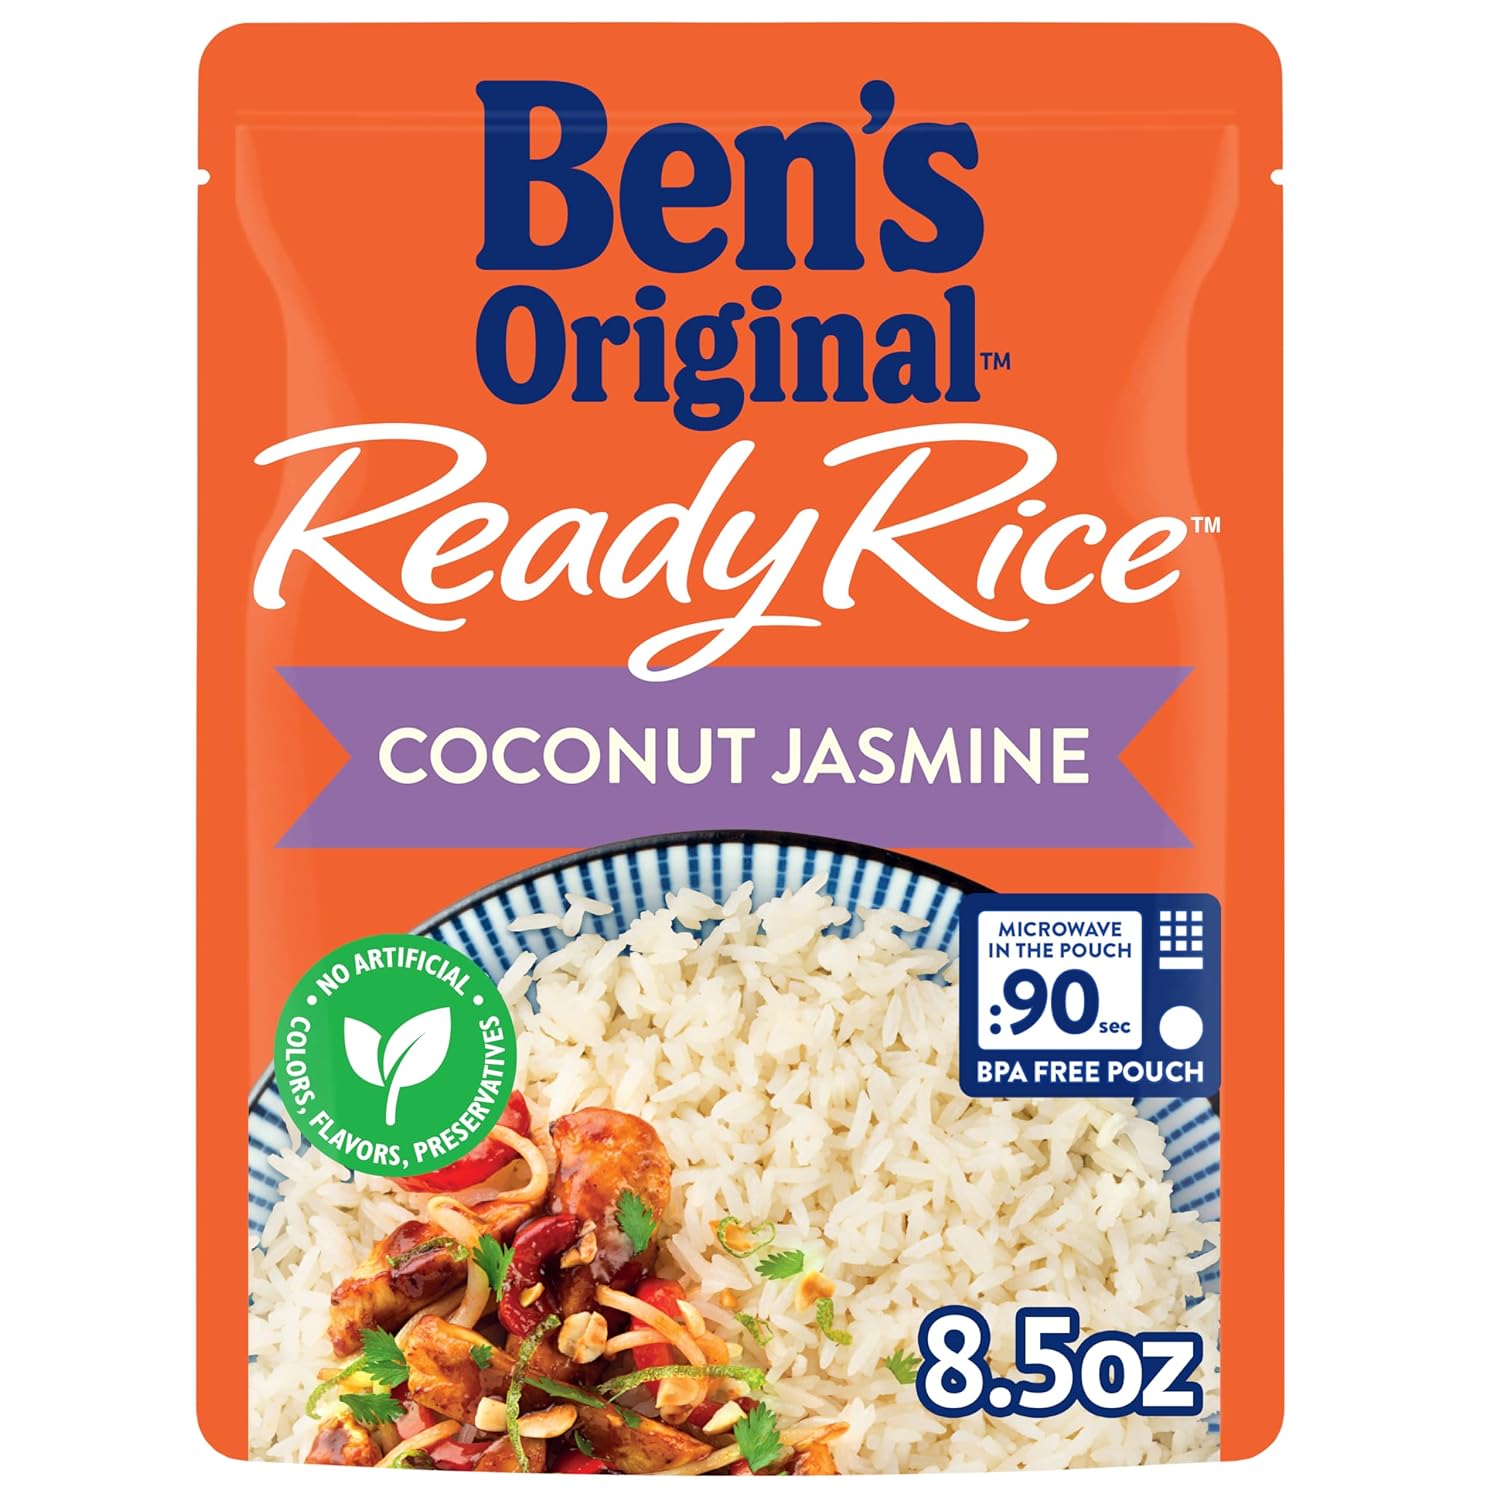 BEN'S ORIGINAL Ready Rice Coconut Jasmine Flavored Rice, Easy Dinner Side, 8.5 OZ Pouch (Pack of 12)